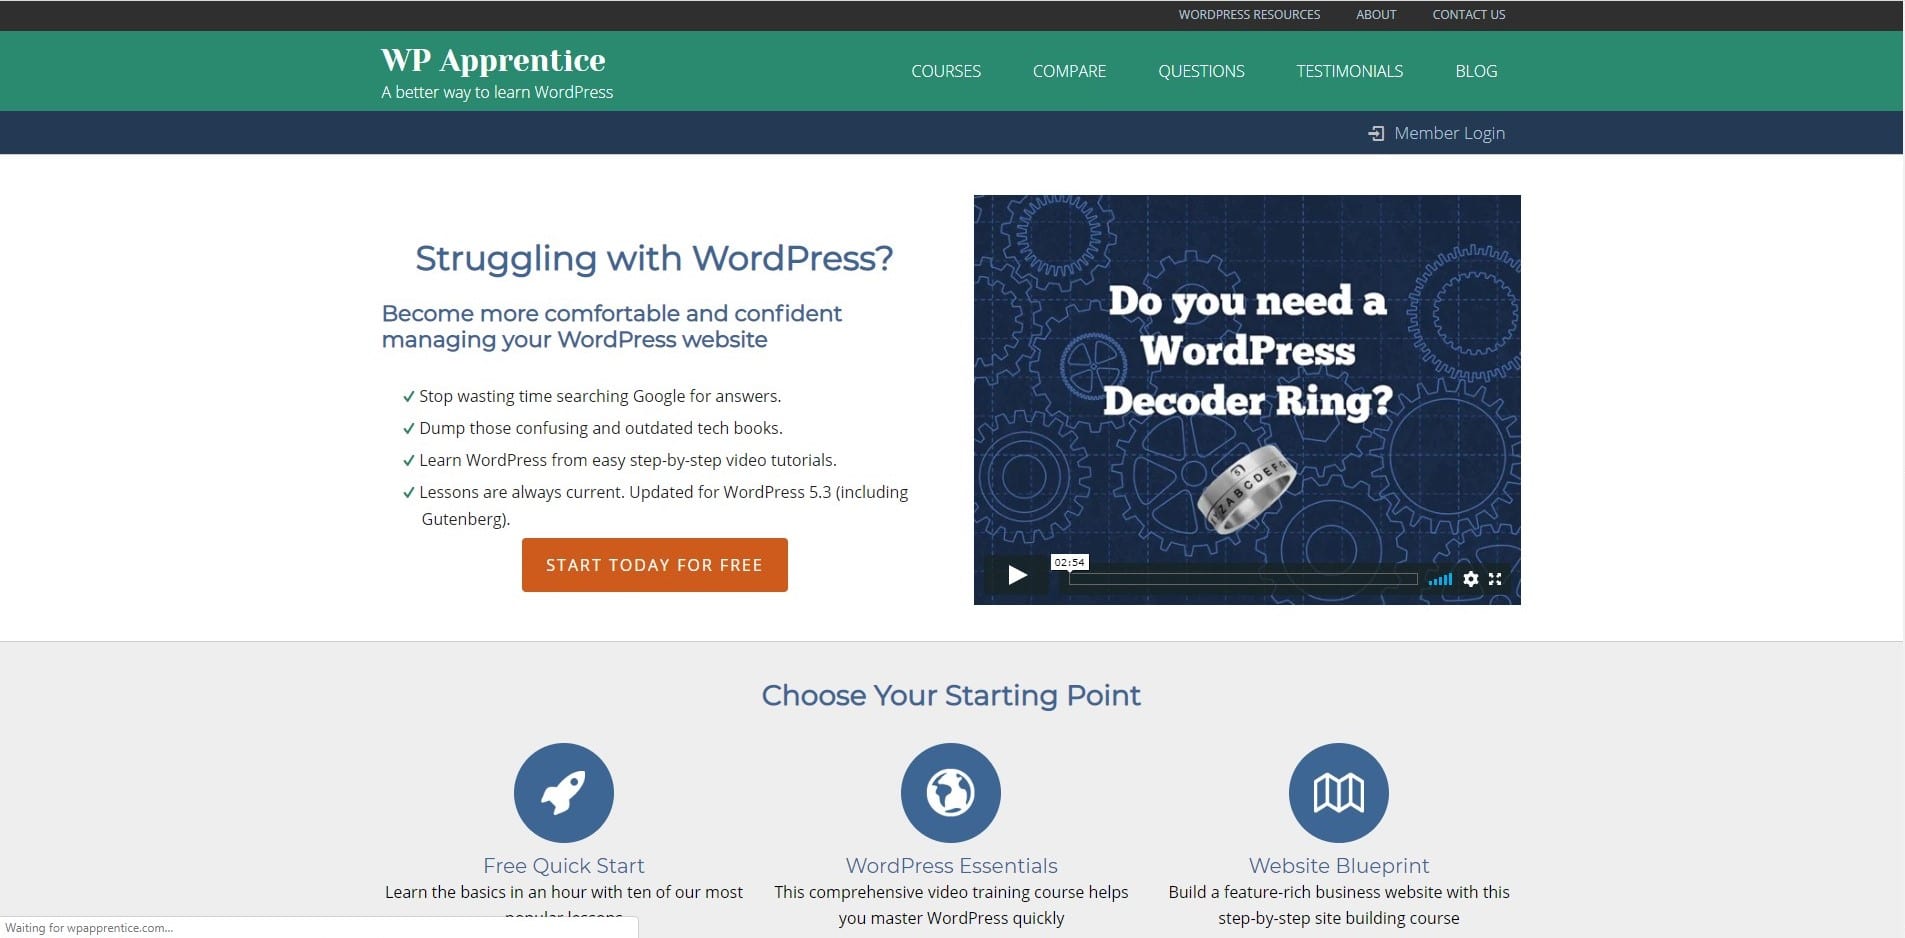 Learn WordPress with WP apprentice